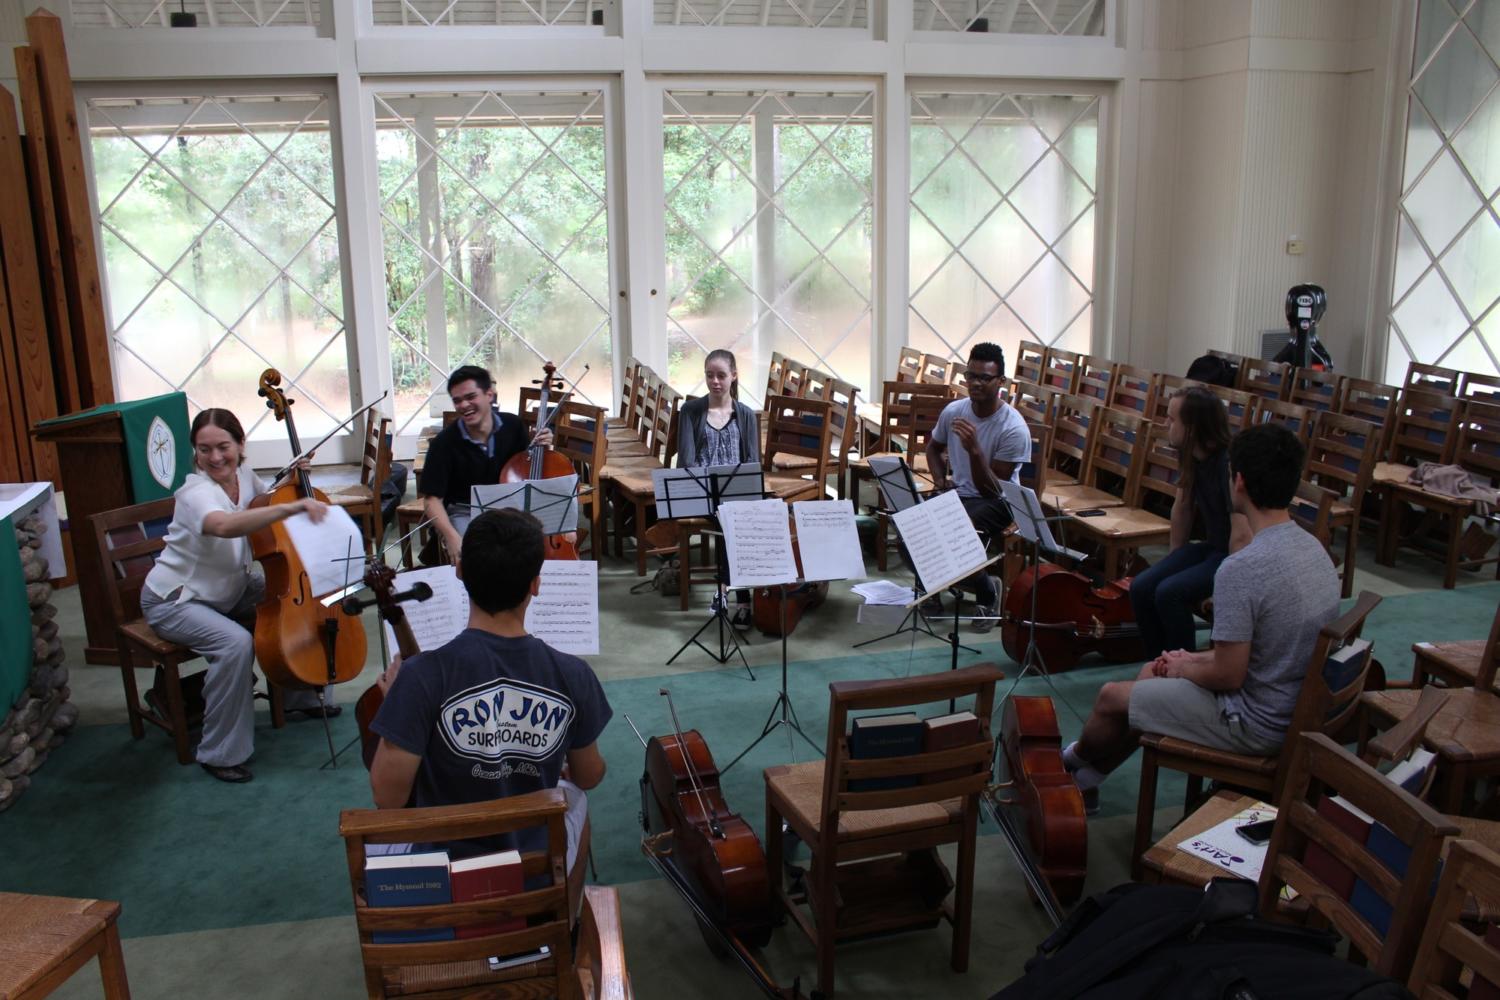 Cello students play at retreat. This retreat is a first for the performance majors. Photo credit: Anna Knapp